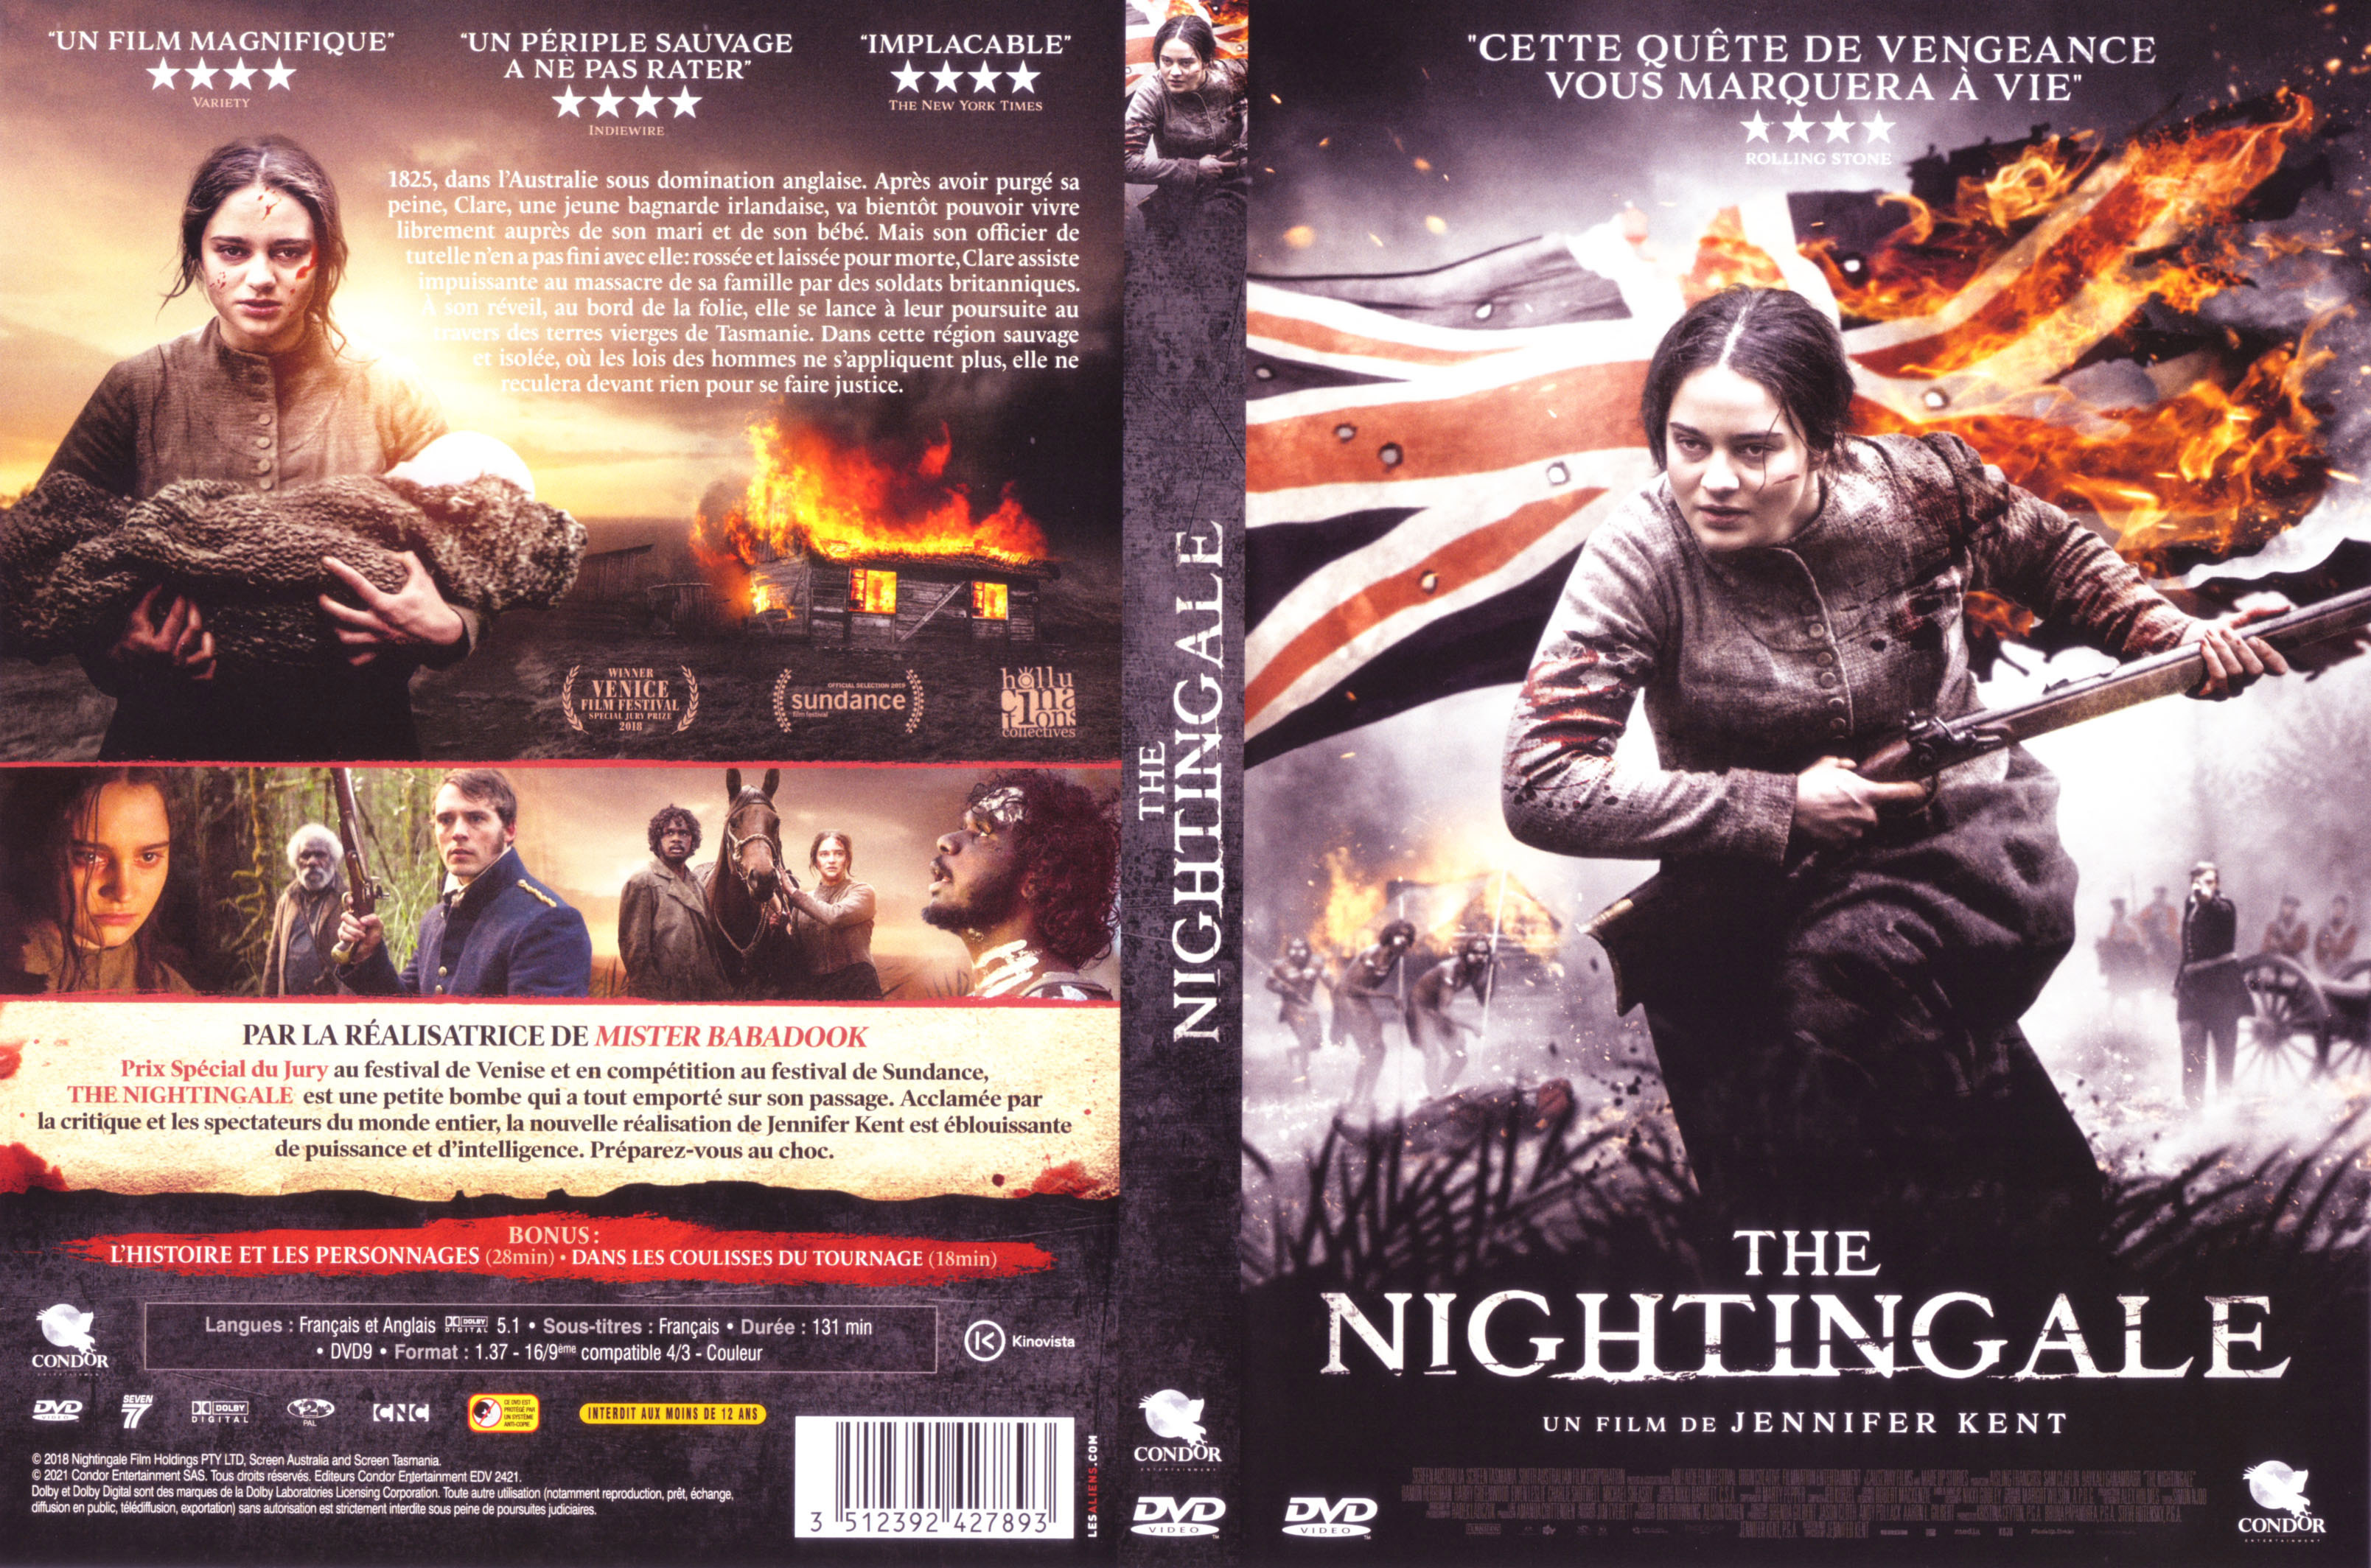 Jaquette DVD The nightingale